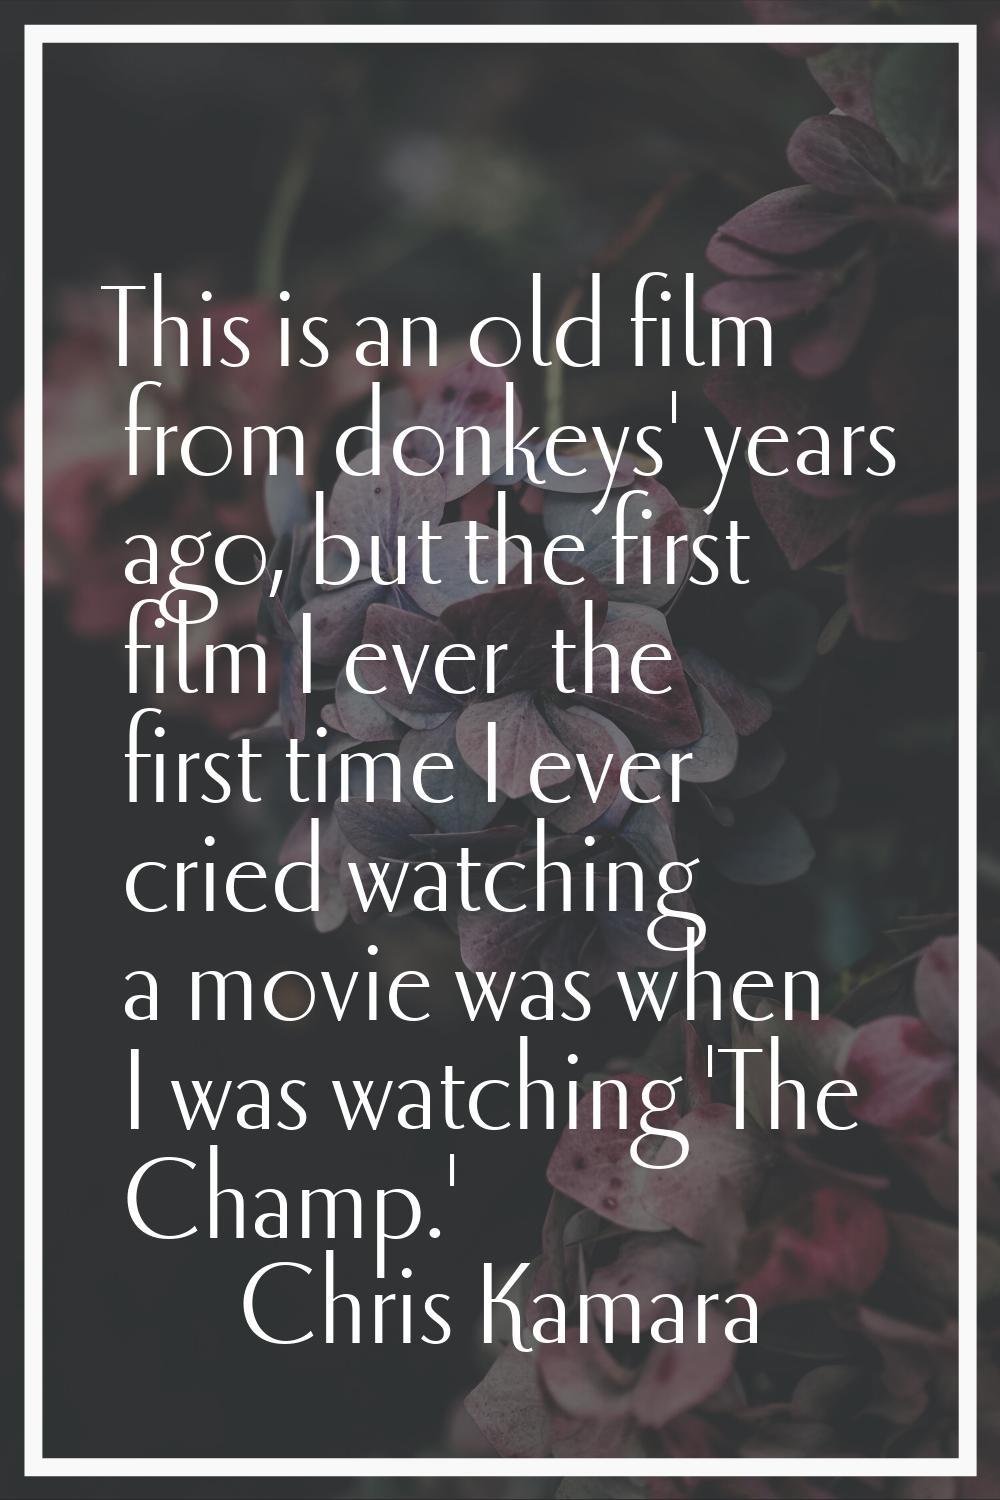 This is an old film from donkeys' years ago, but the first film I ever… the first time I ever cried